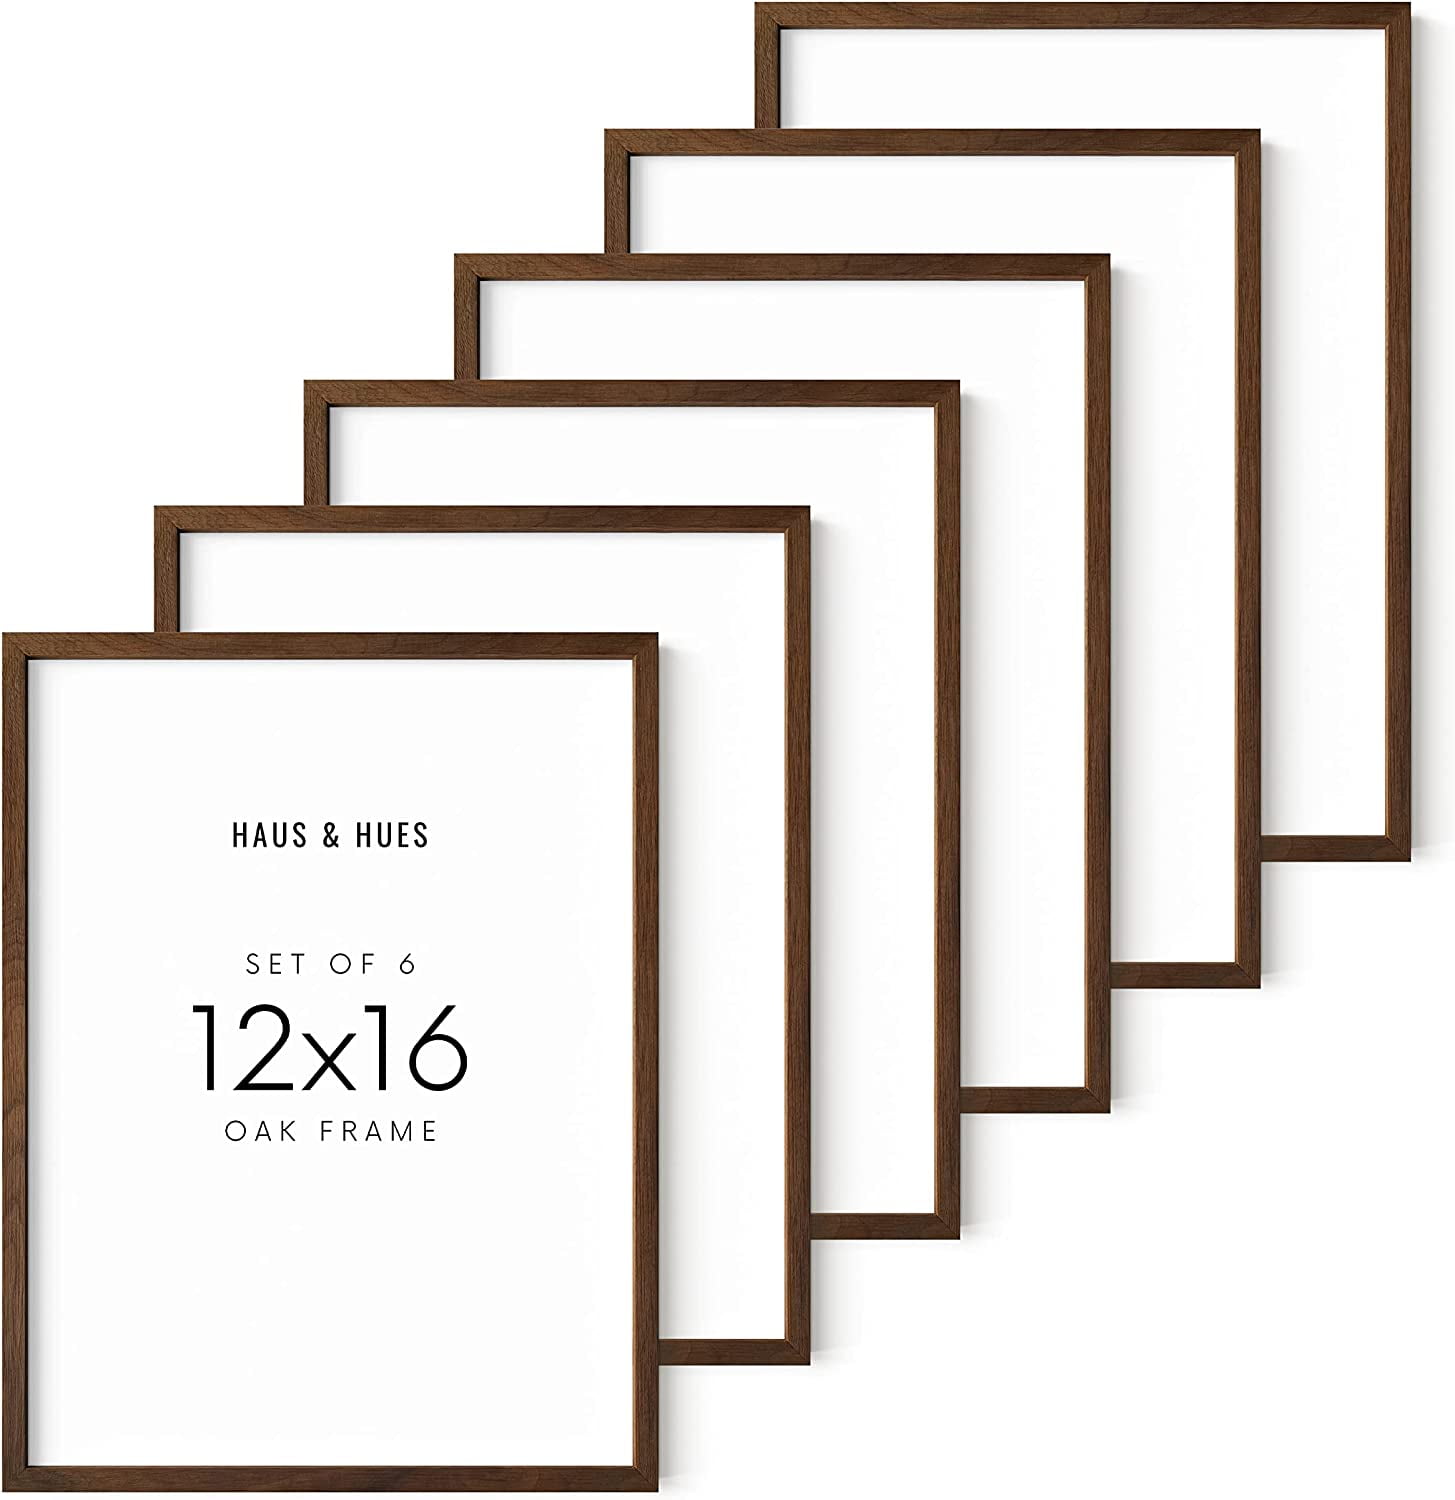 Giftgarden 4x6 Picture Frame Brown Set of 7 Rustic Walnut-Color Photo  Frames 4 by 6 for Tabletop or Wall